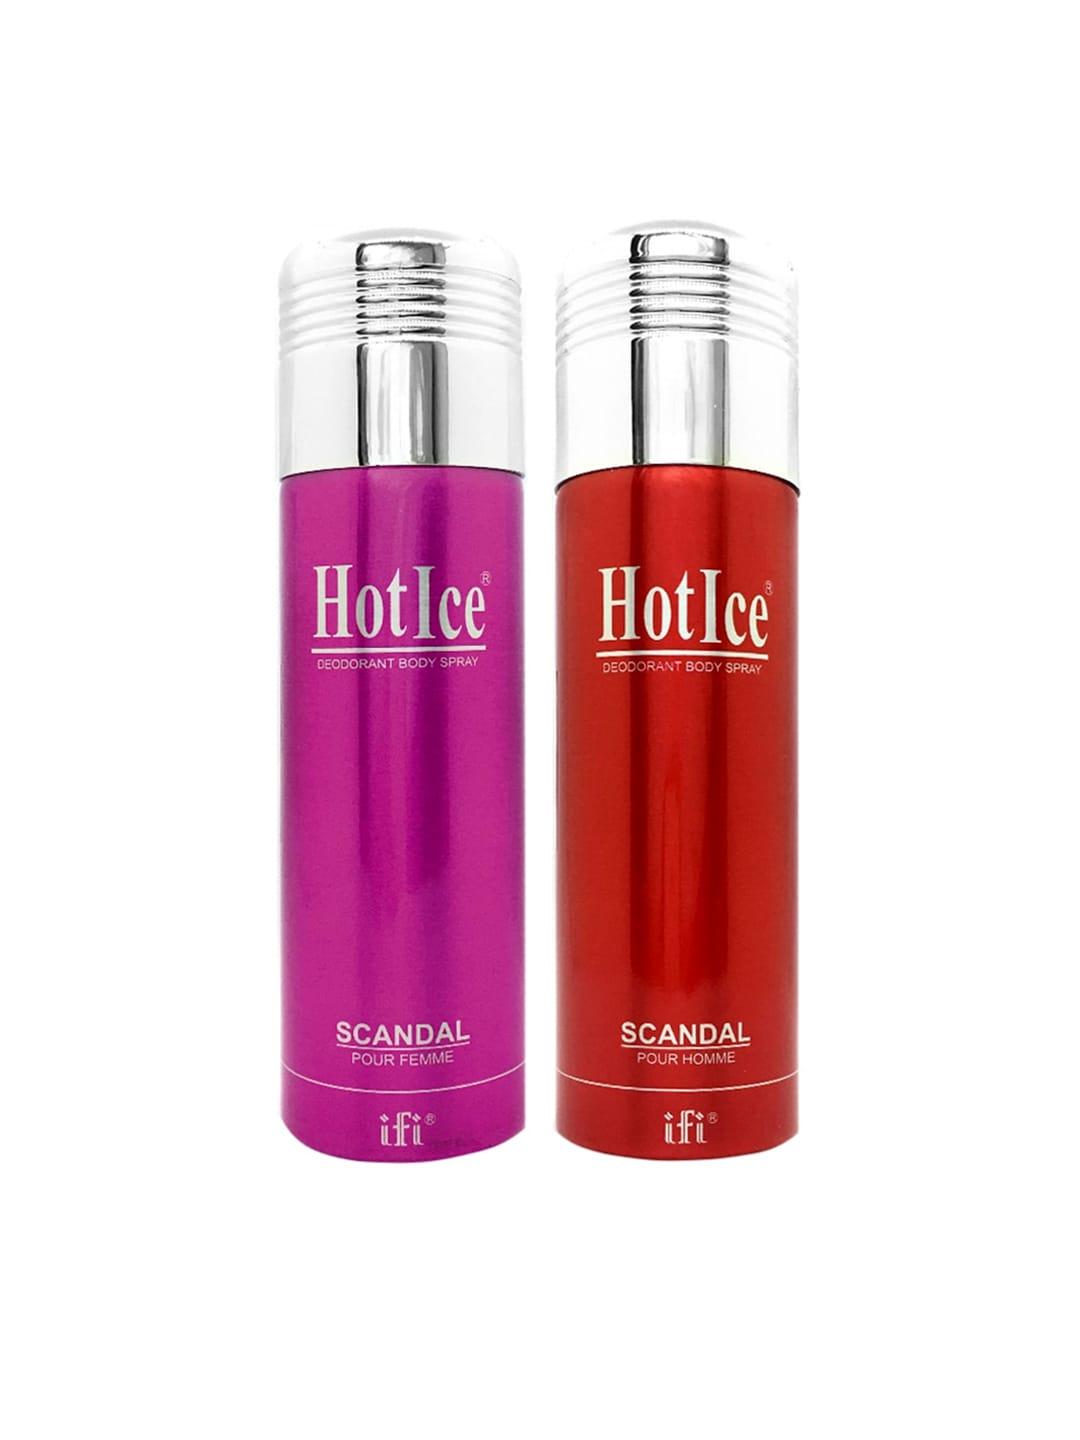 Hot Ice Scandal Fomme & Scandal Homme Deodorant, 200ml Each - ( Set of 2)